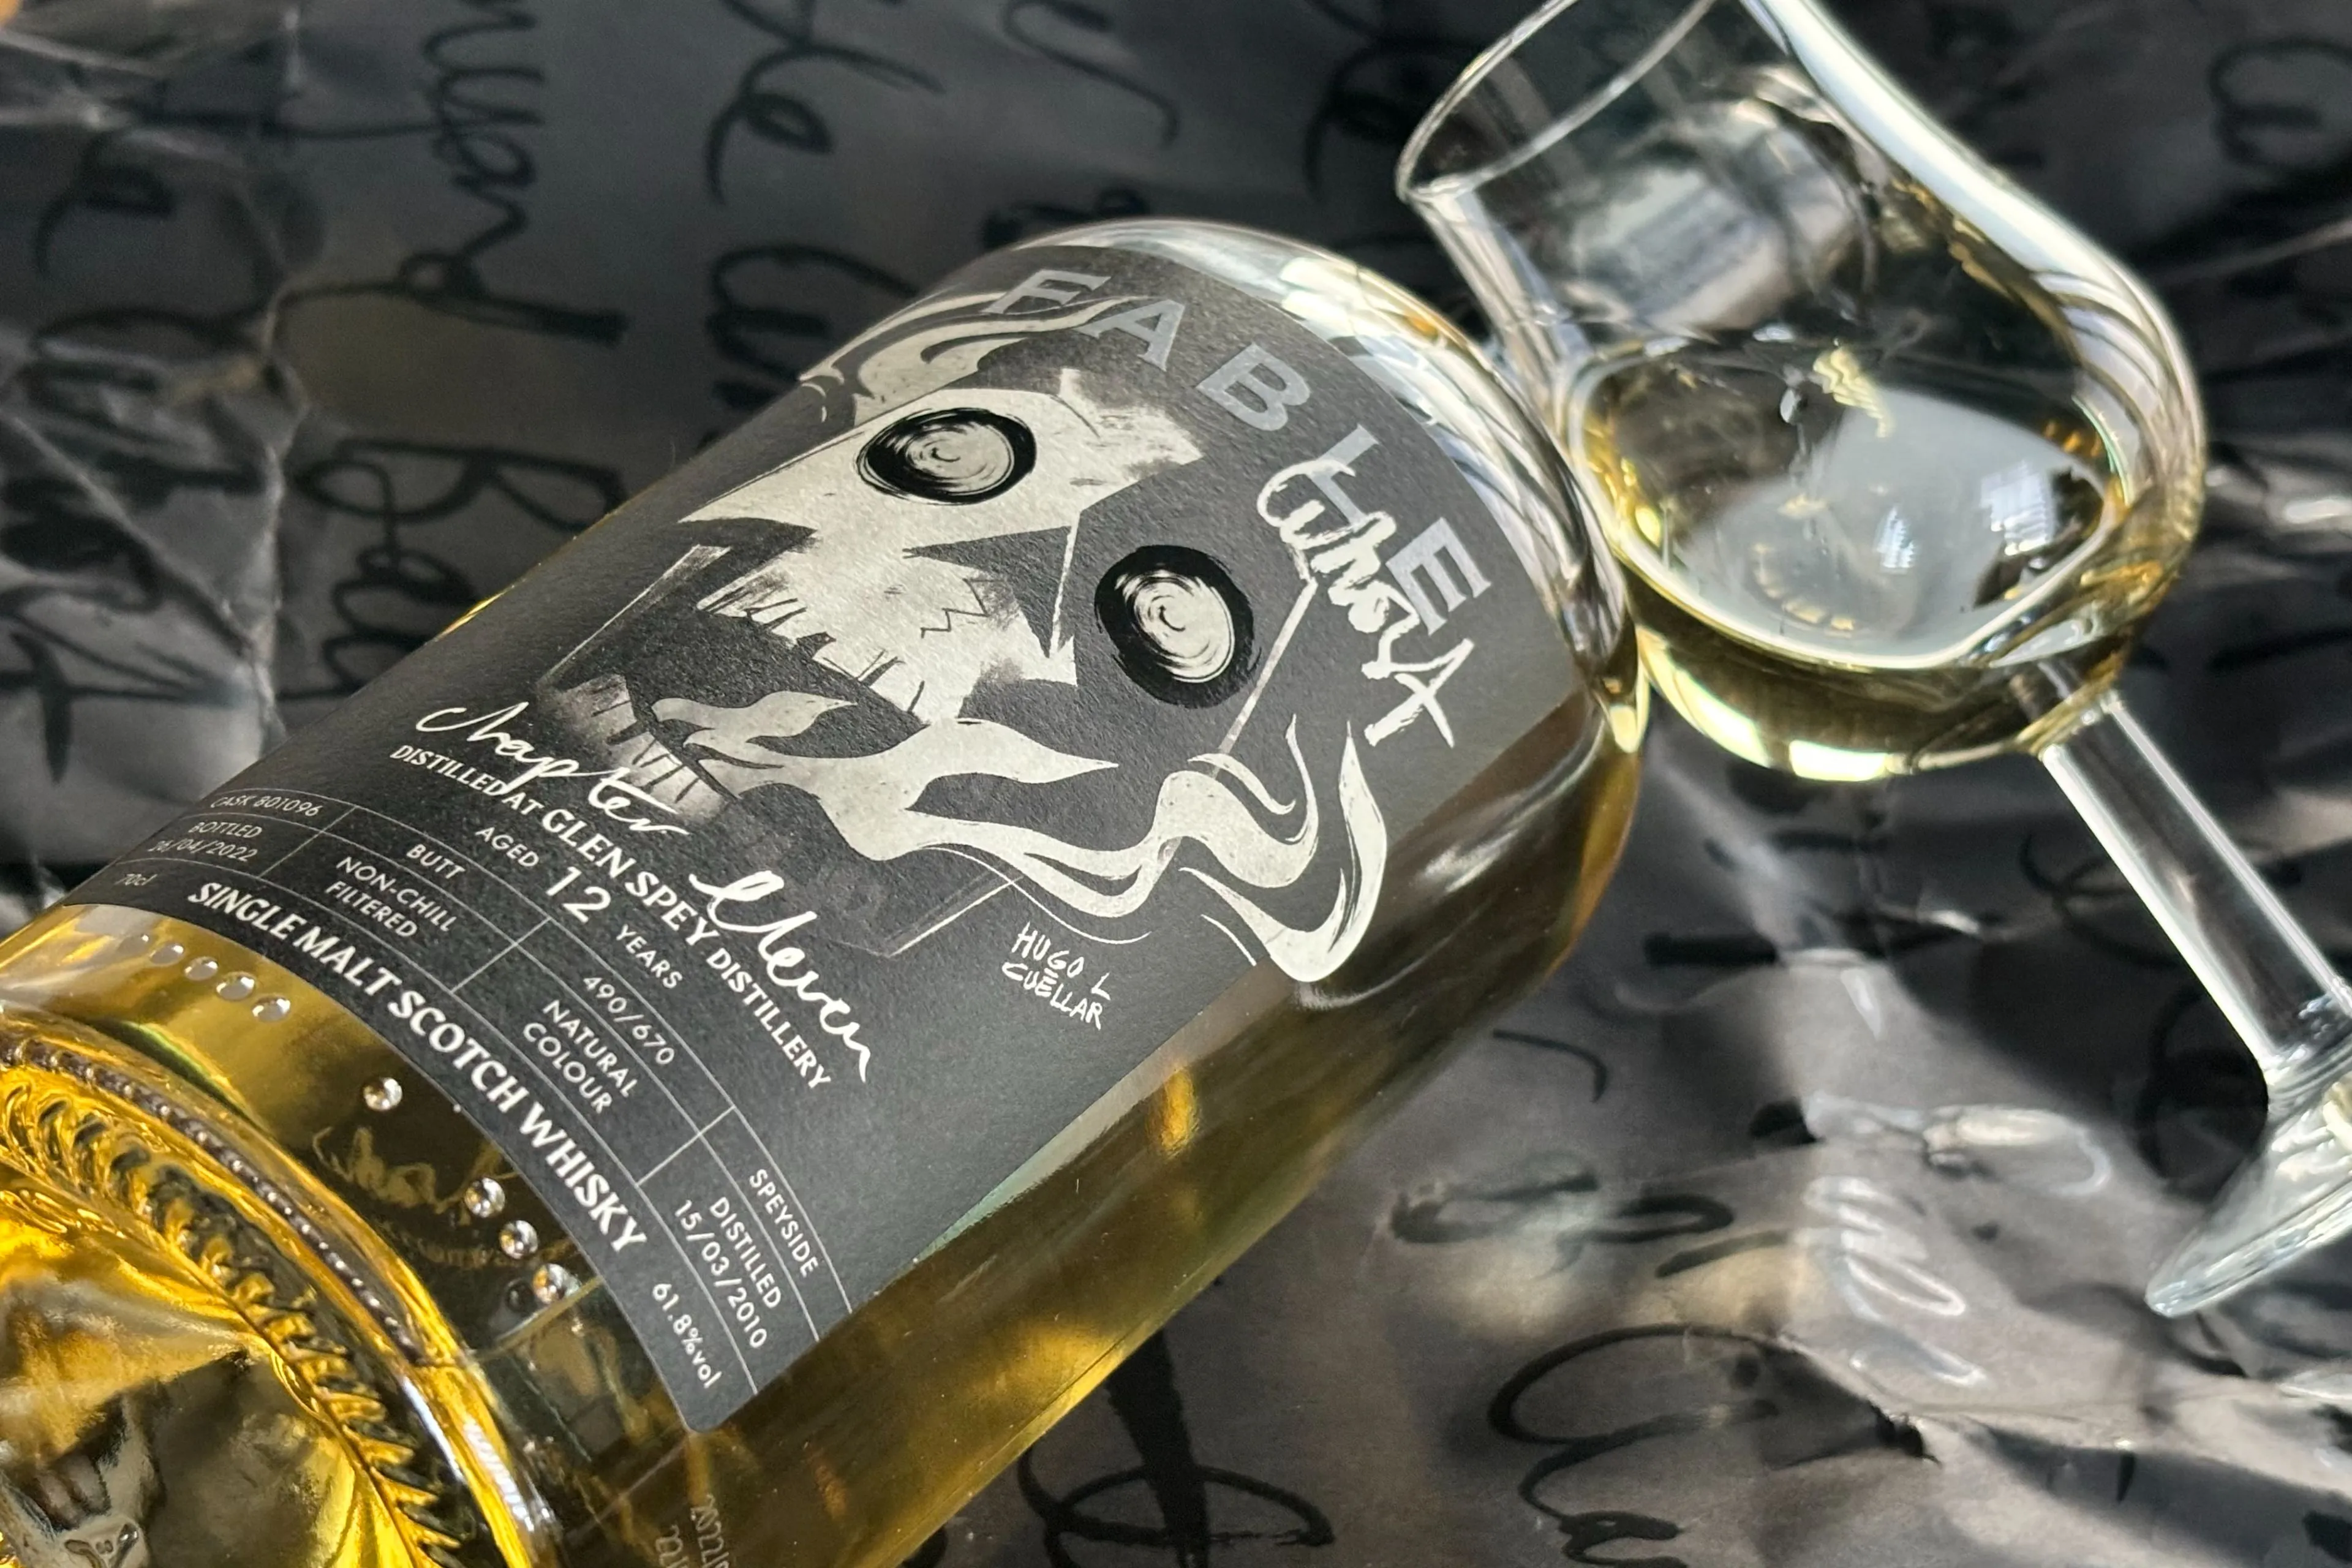 fable chapter eleven review whisky monkeys 4